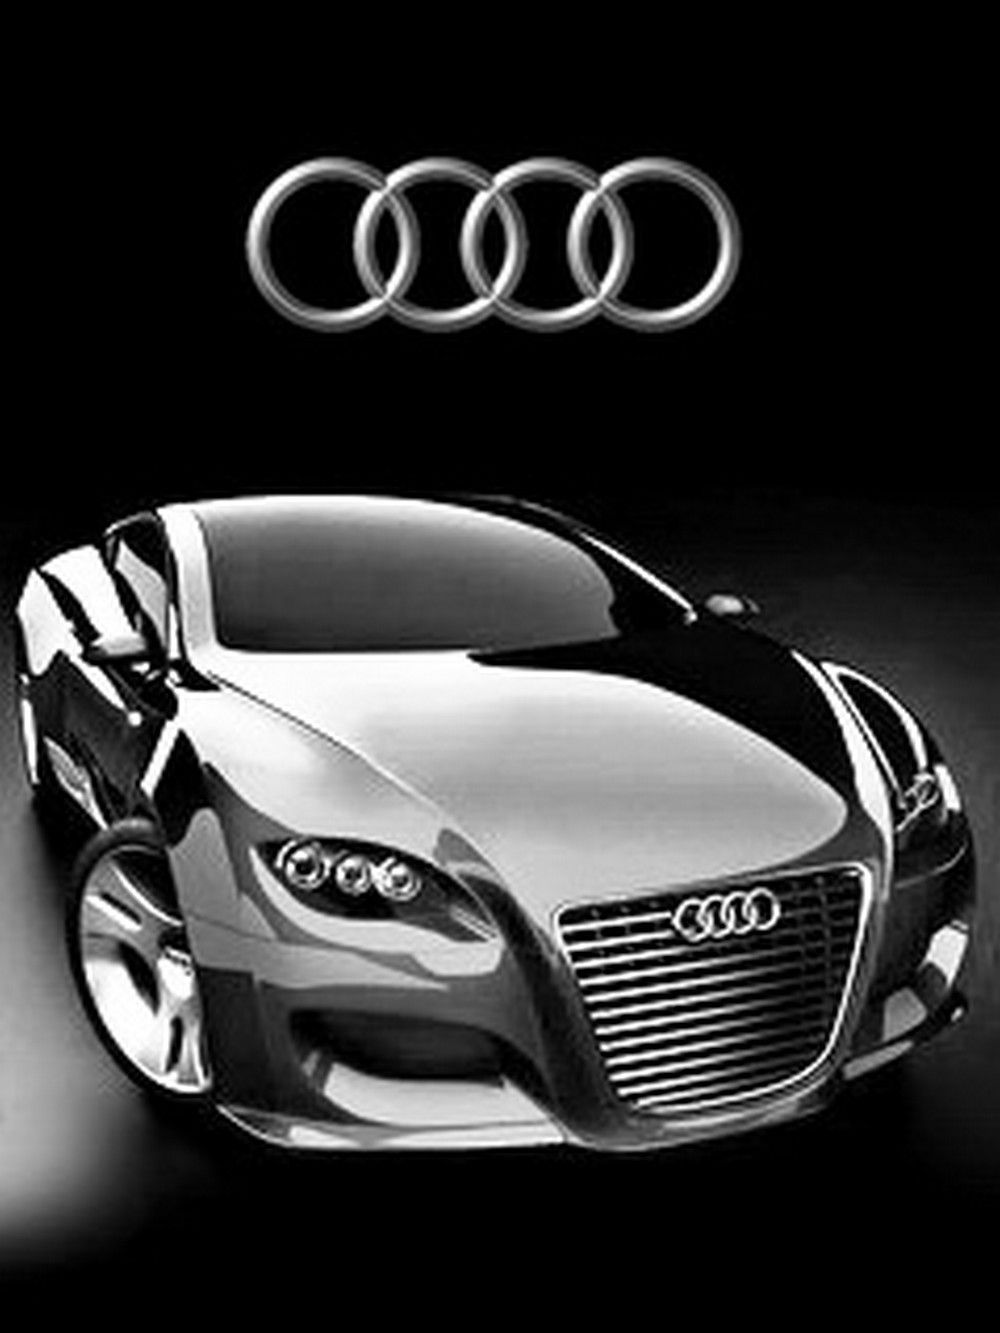 Audi Car Hd Wallpapers For Mobile